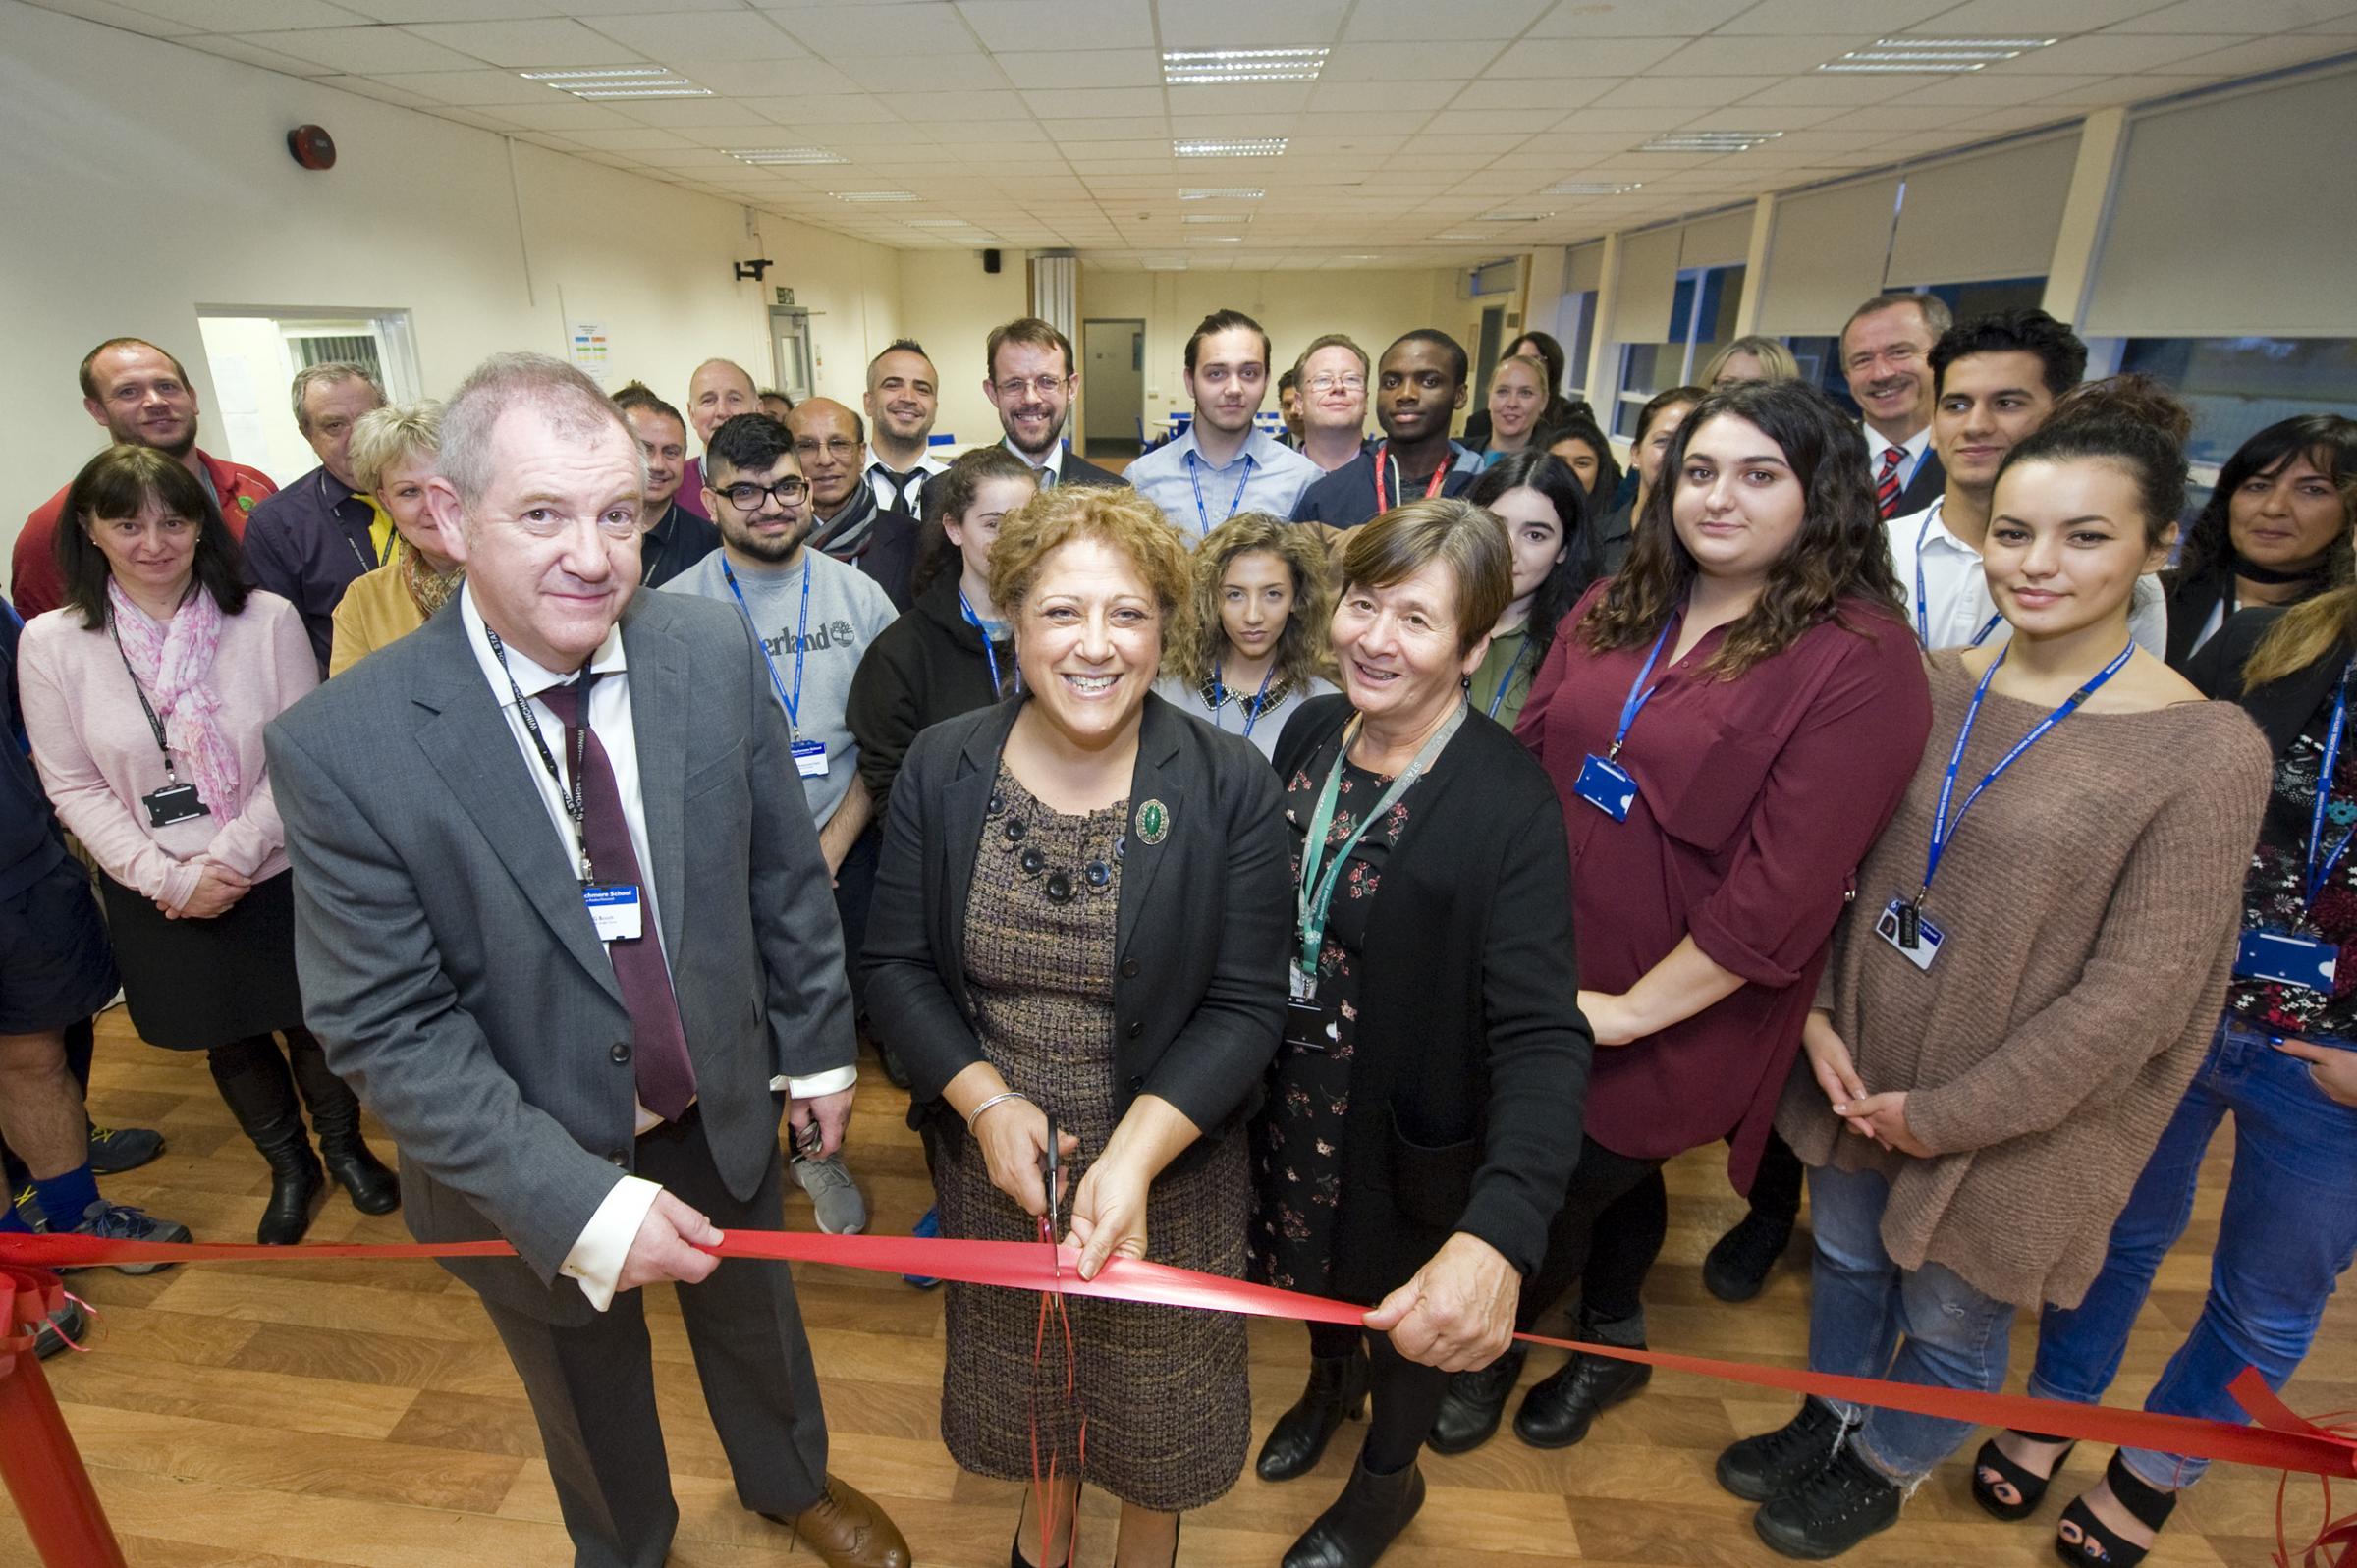 'A whole which is greater than the sum of its parts' - refurbished sixth form centre opened